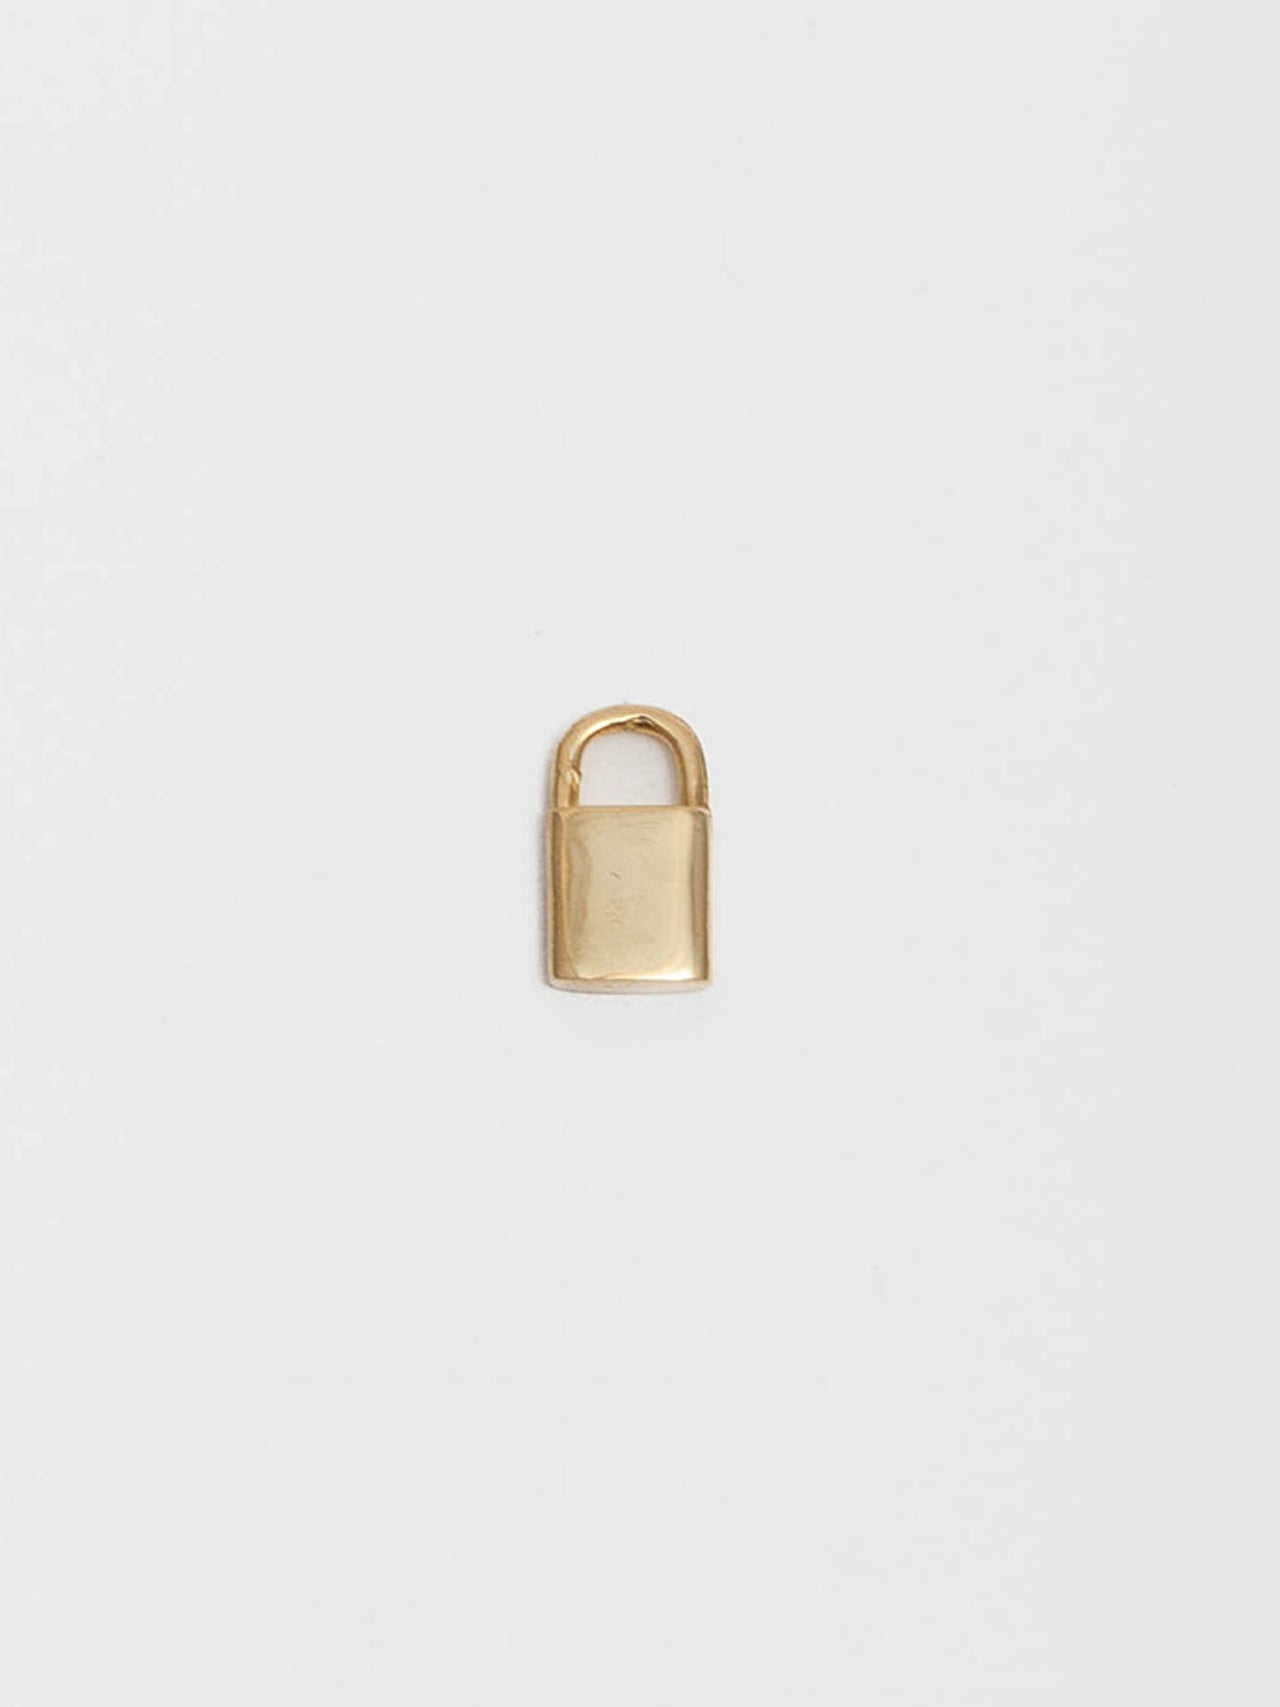 14kt Yellow Gold Padlock Charm pictured on light grey background. 